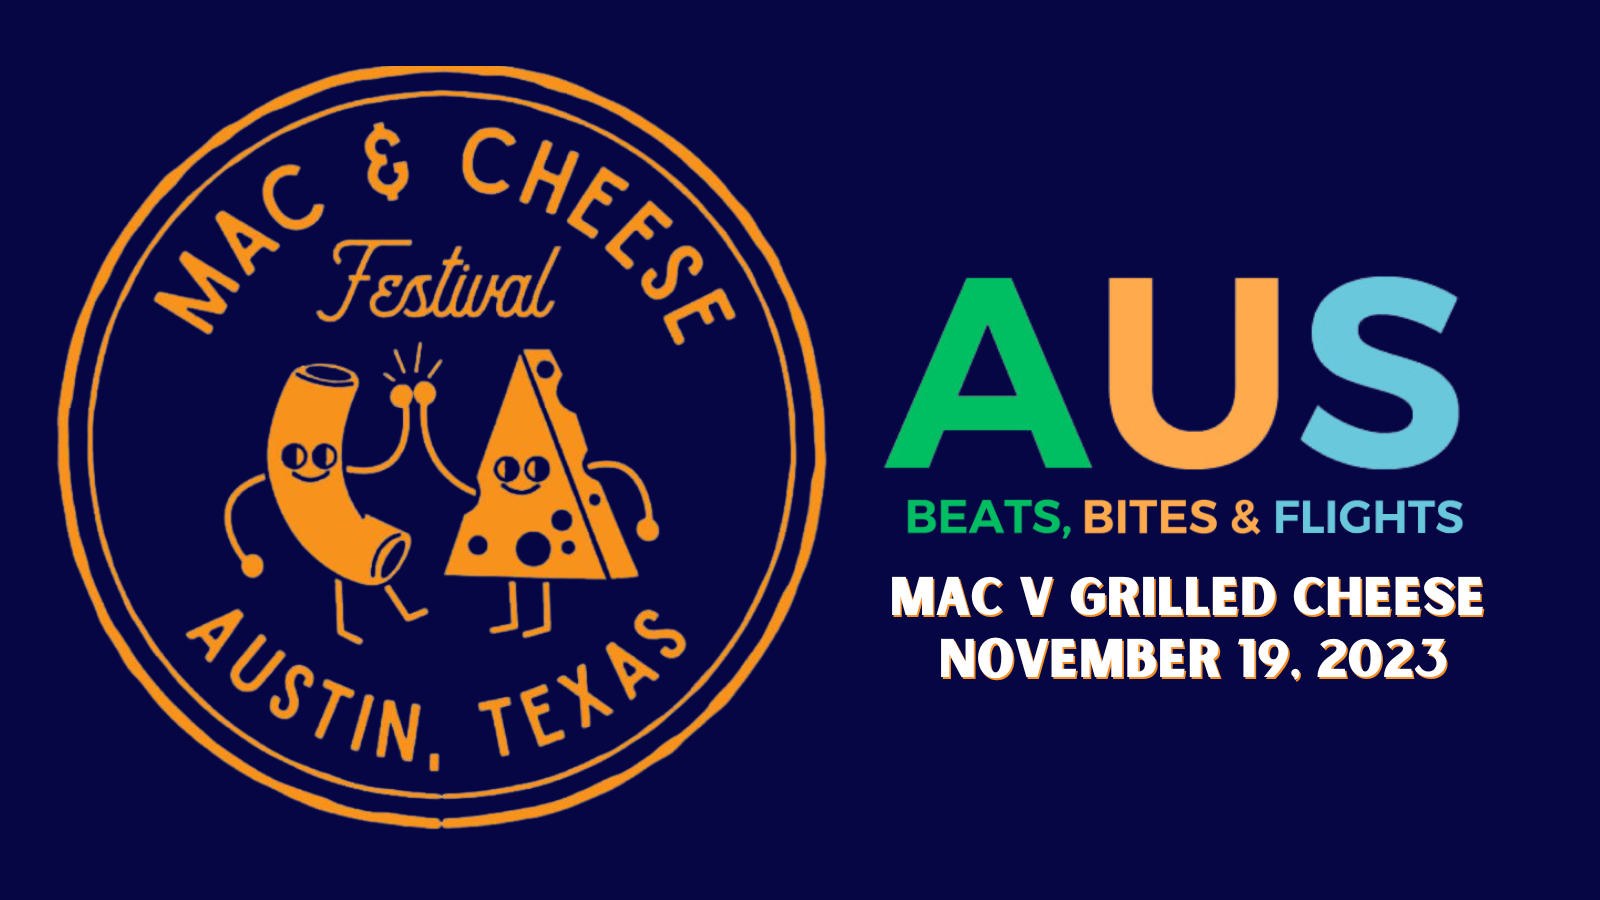 Austin-Bergstrom to sponsor Austin Mac & Grilled Cheese Fest this weekend